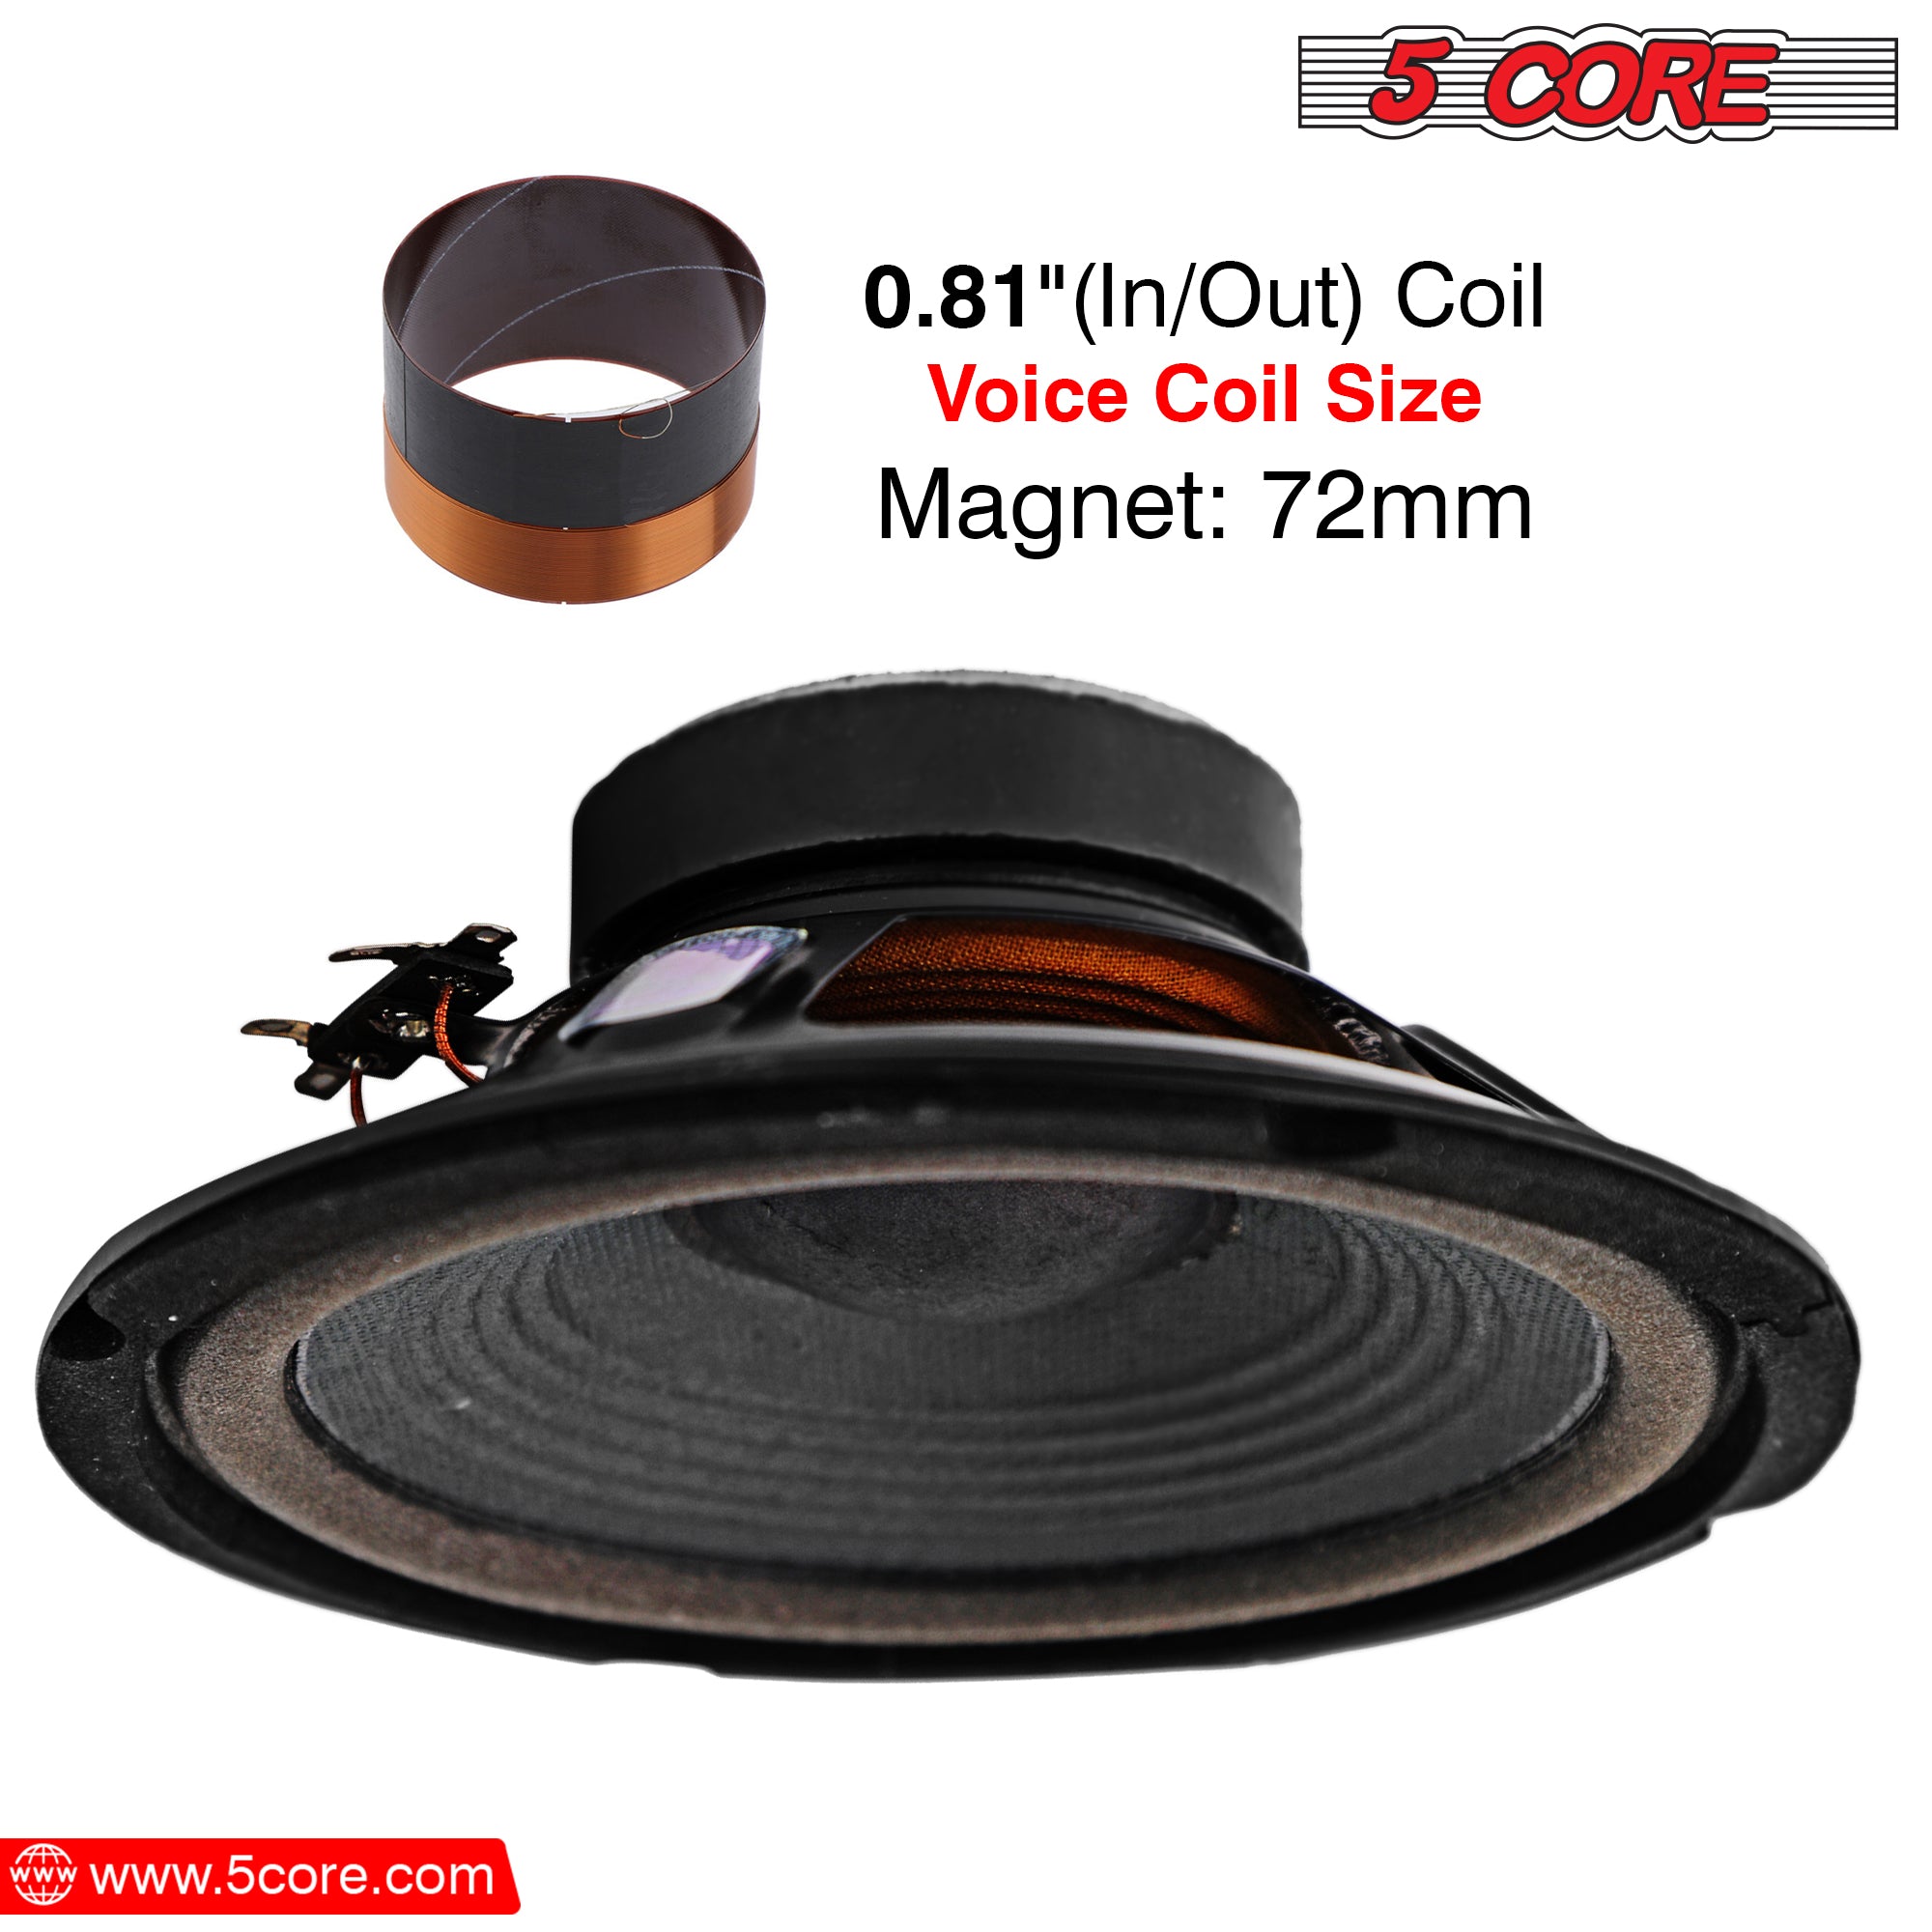 6 Inch Subwoofer Car Audio has 0.81 Inch voice coil